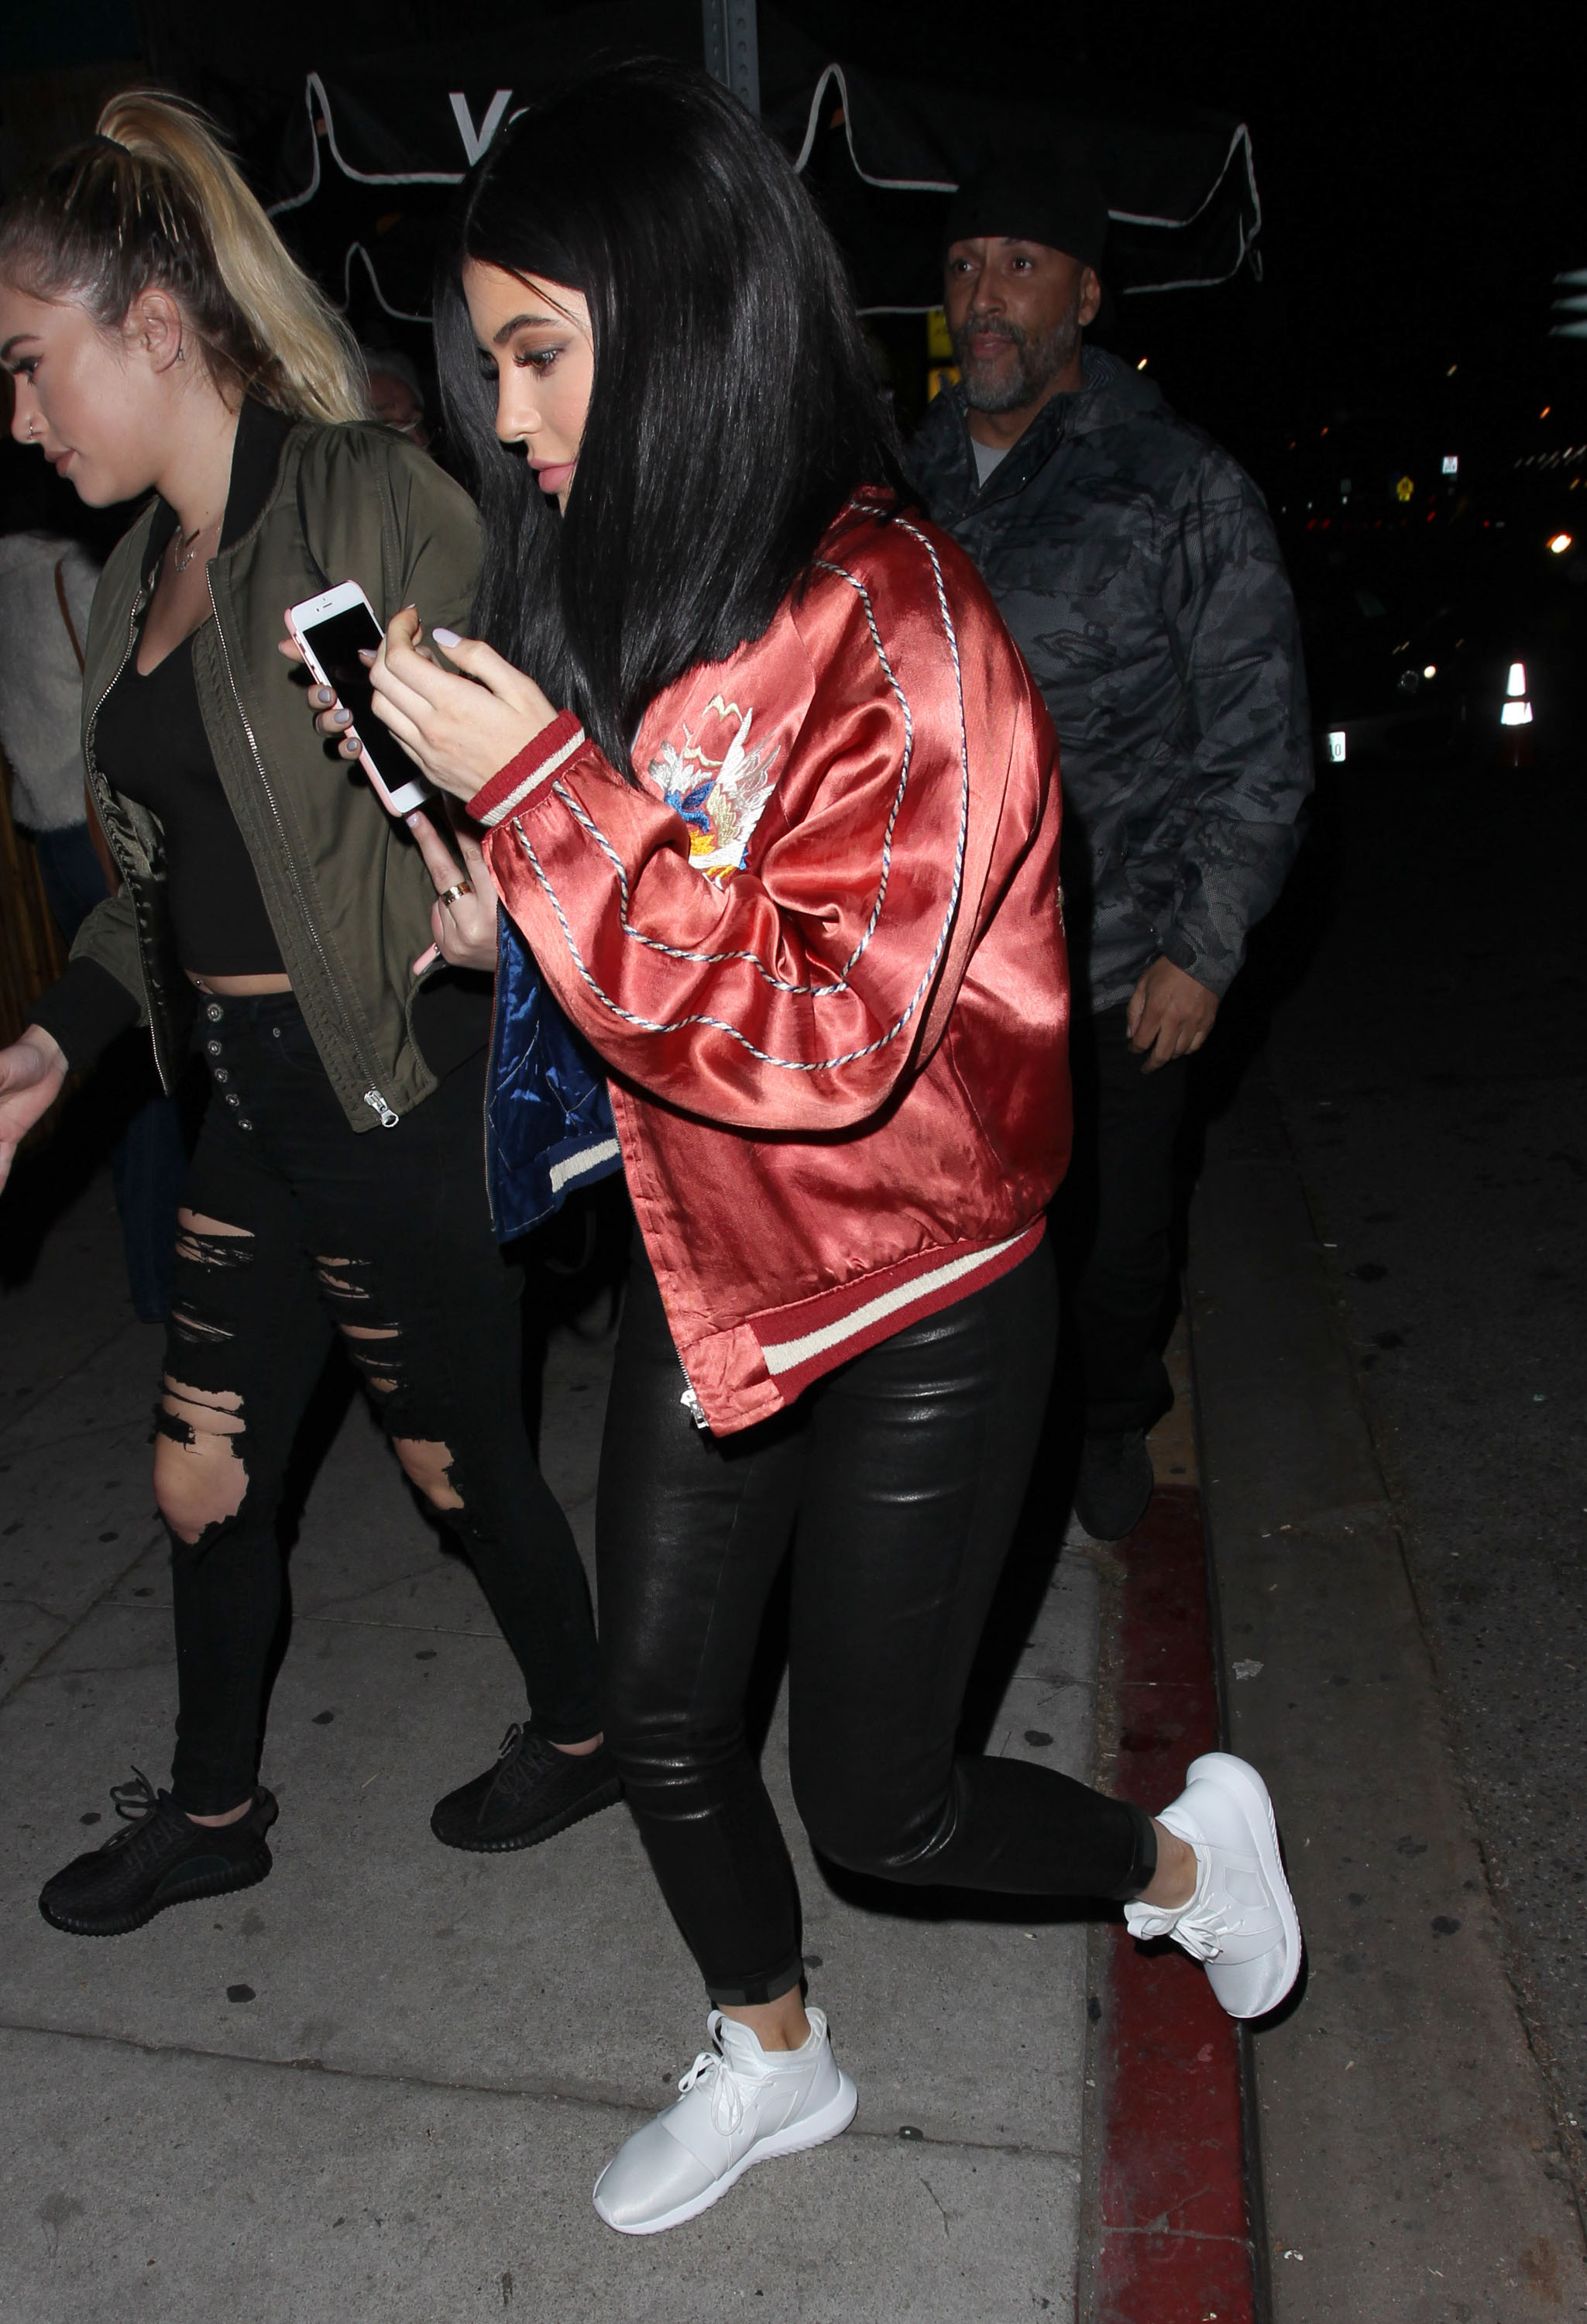 Kylie Jenner at The Nice Guy Club